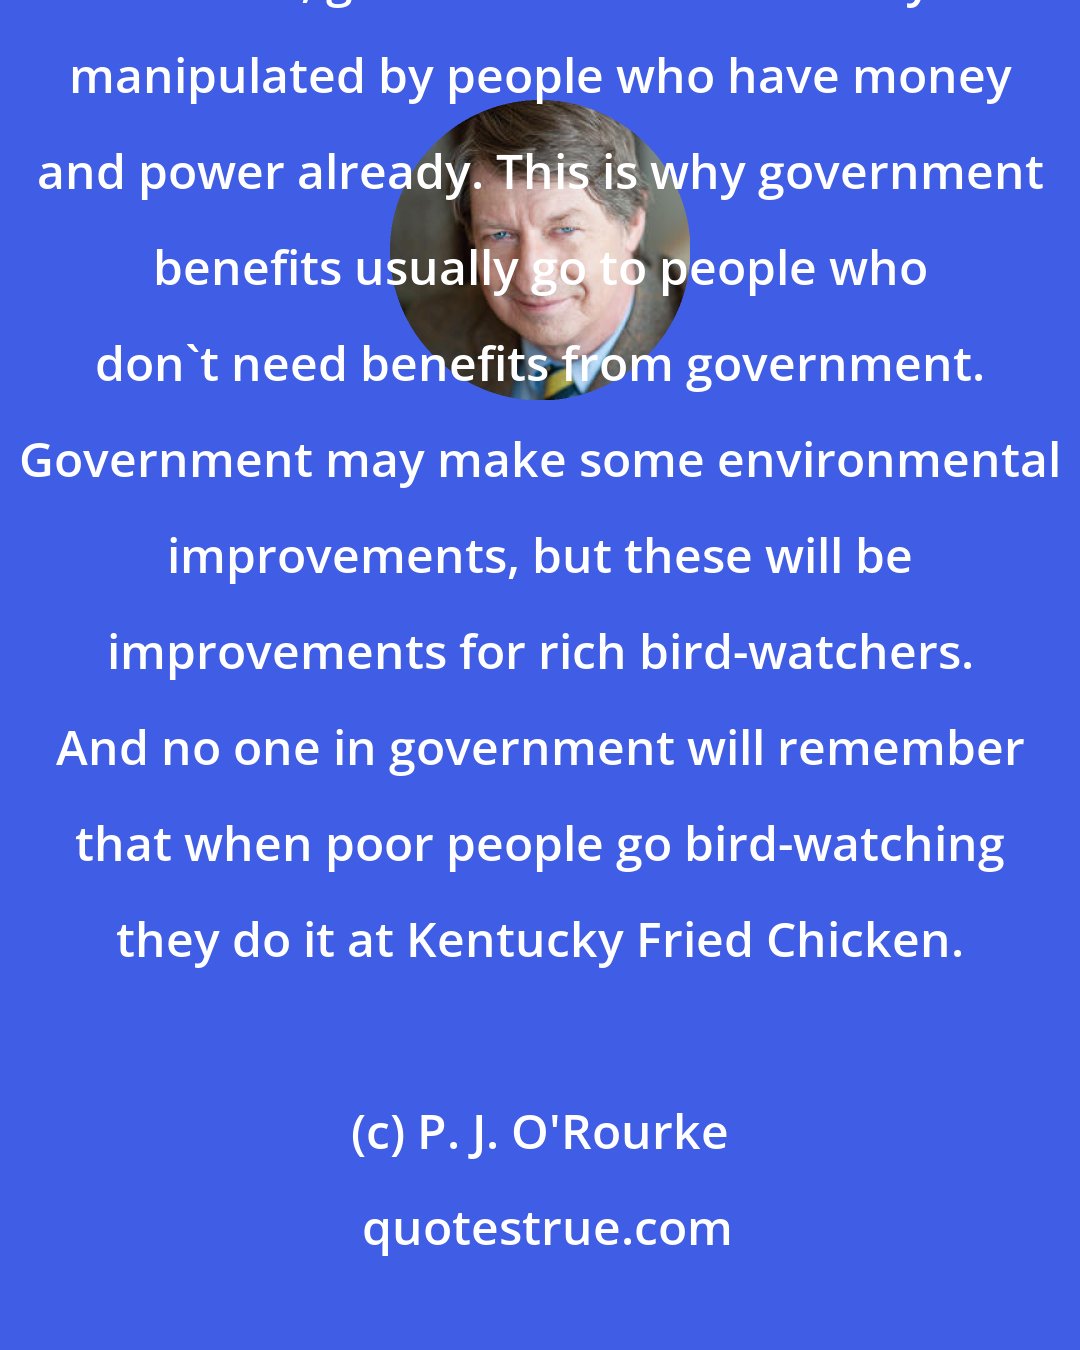 P. J. O'Rourke: When government does, occasionally, work, it works in an elitist fashion. That is, government is most easily manipulated by people who have money and power already. This is why government benefits usually go to people who don't need benefits from government. Government may make some environmental improvements, but these will be improvements for rich bird-watchers. And no one in government will remember that when poor people go bird-watching they do it at Kentucky Fried Chicken.